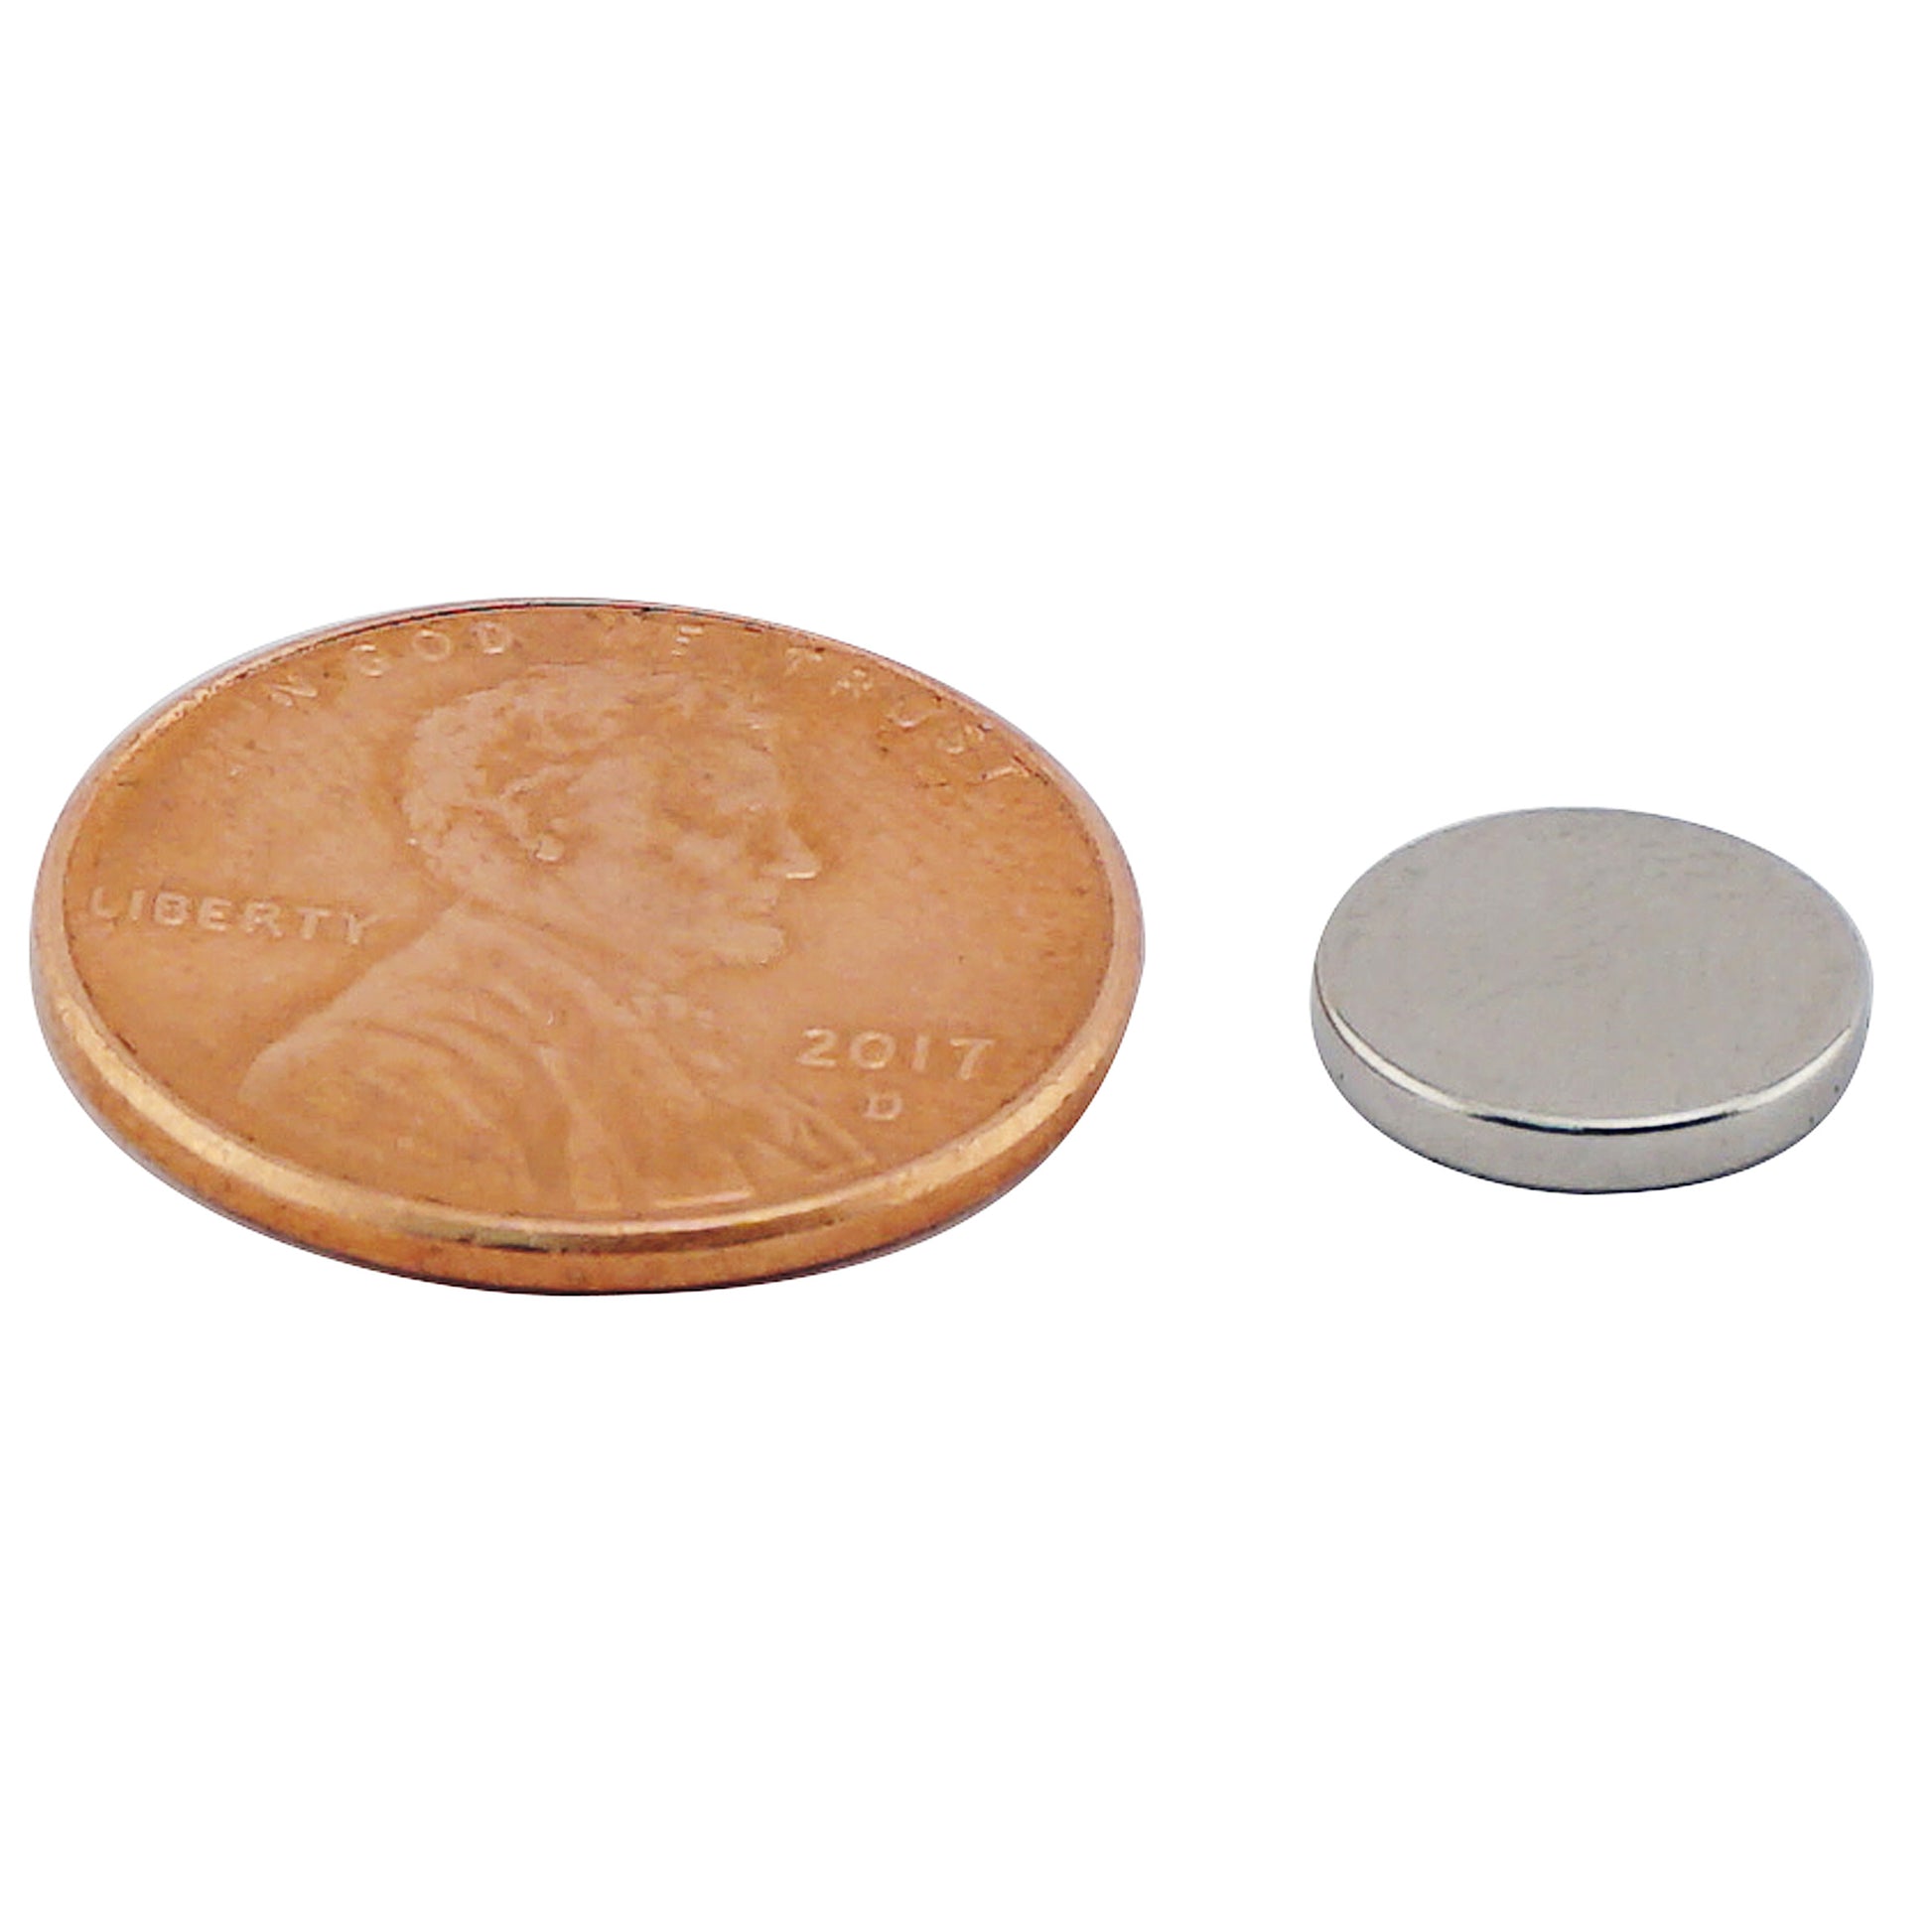 Load image into Gallery viewer, ND003716N Neodymium Disc Magnet - Compared to Penny for Size Reference